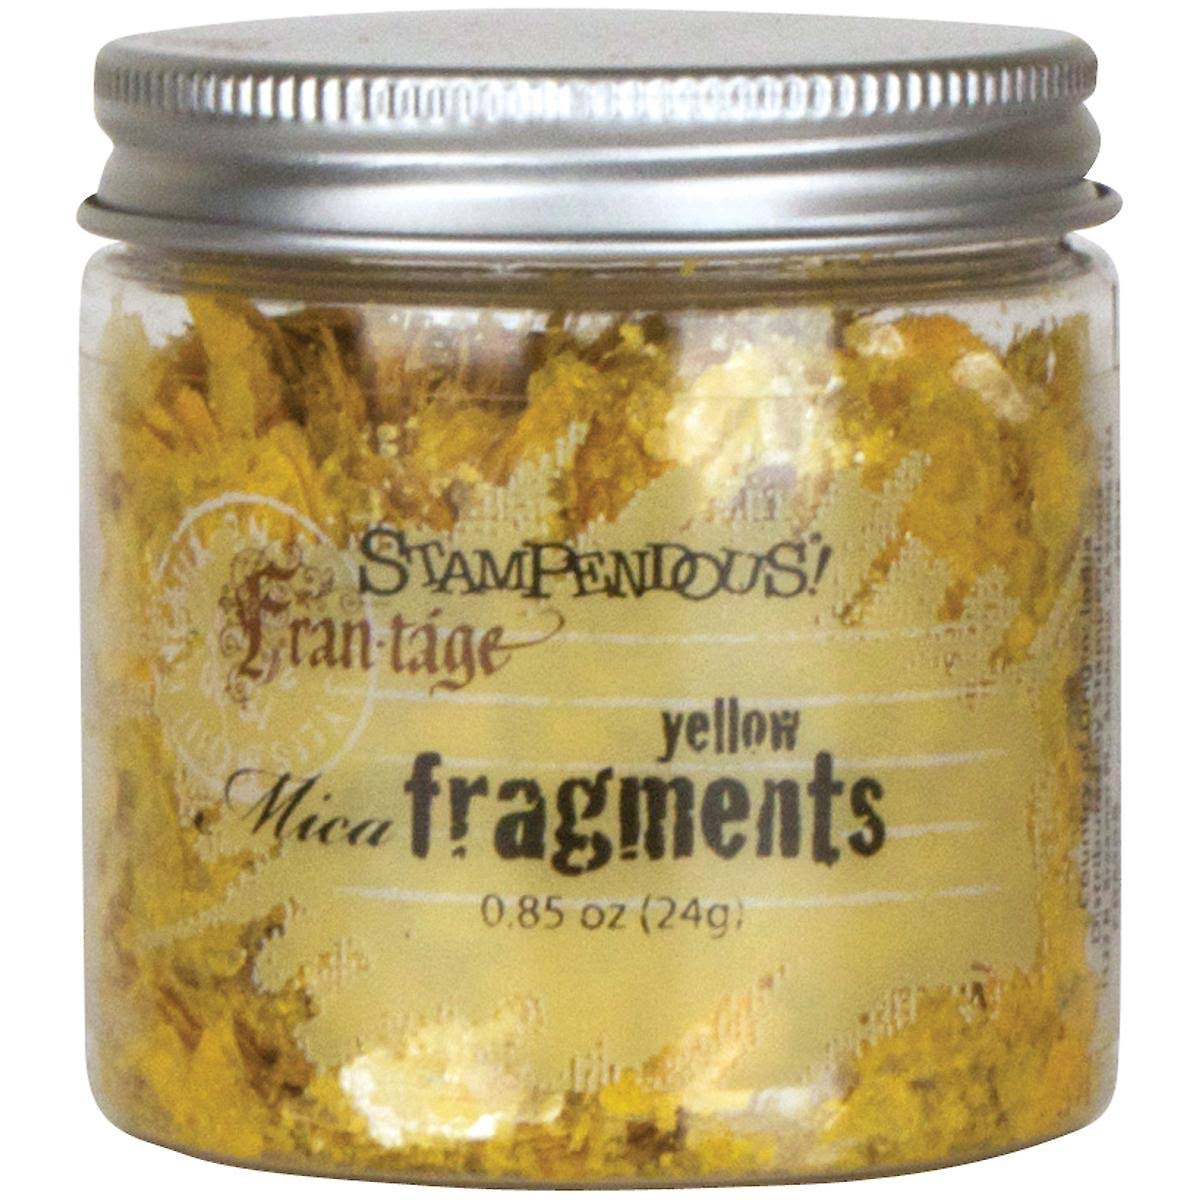 Stampendous Frantage Mica Fragments - Yellow